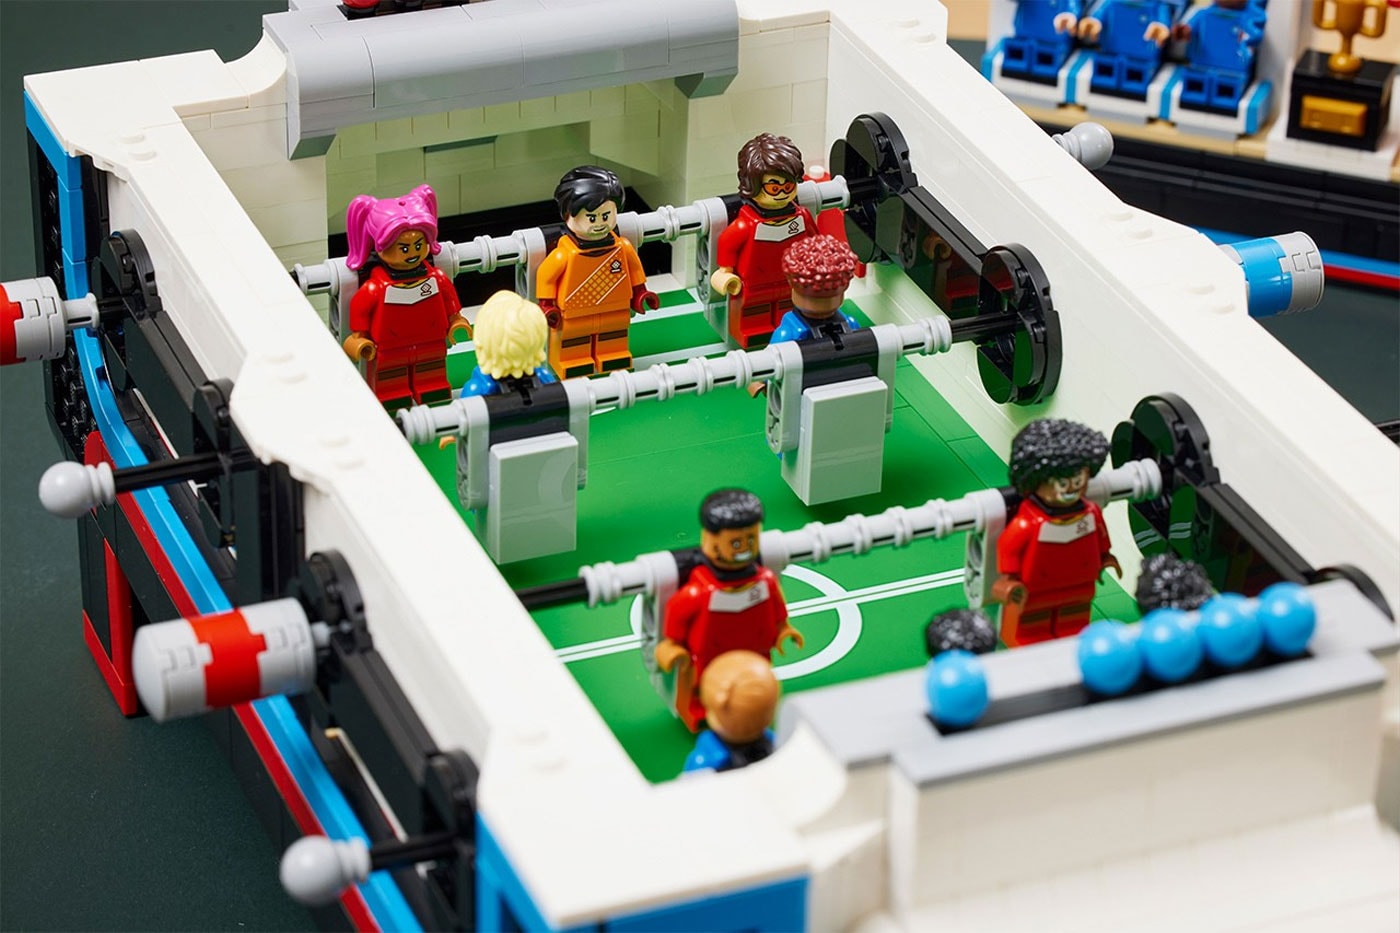 LEGO Table football ideas 2339 pieces minifigure thriller at the spinner november 1 release info date price